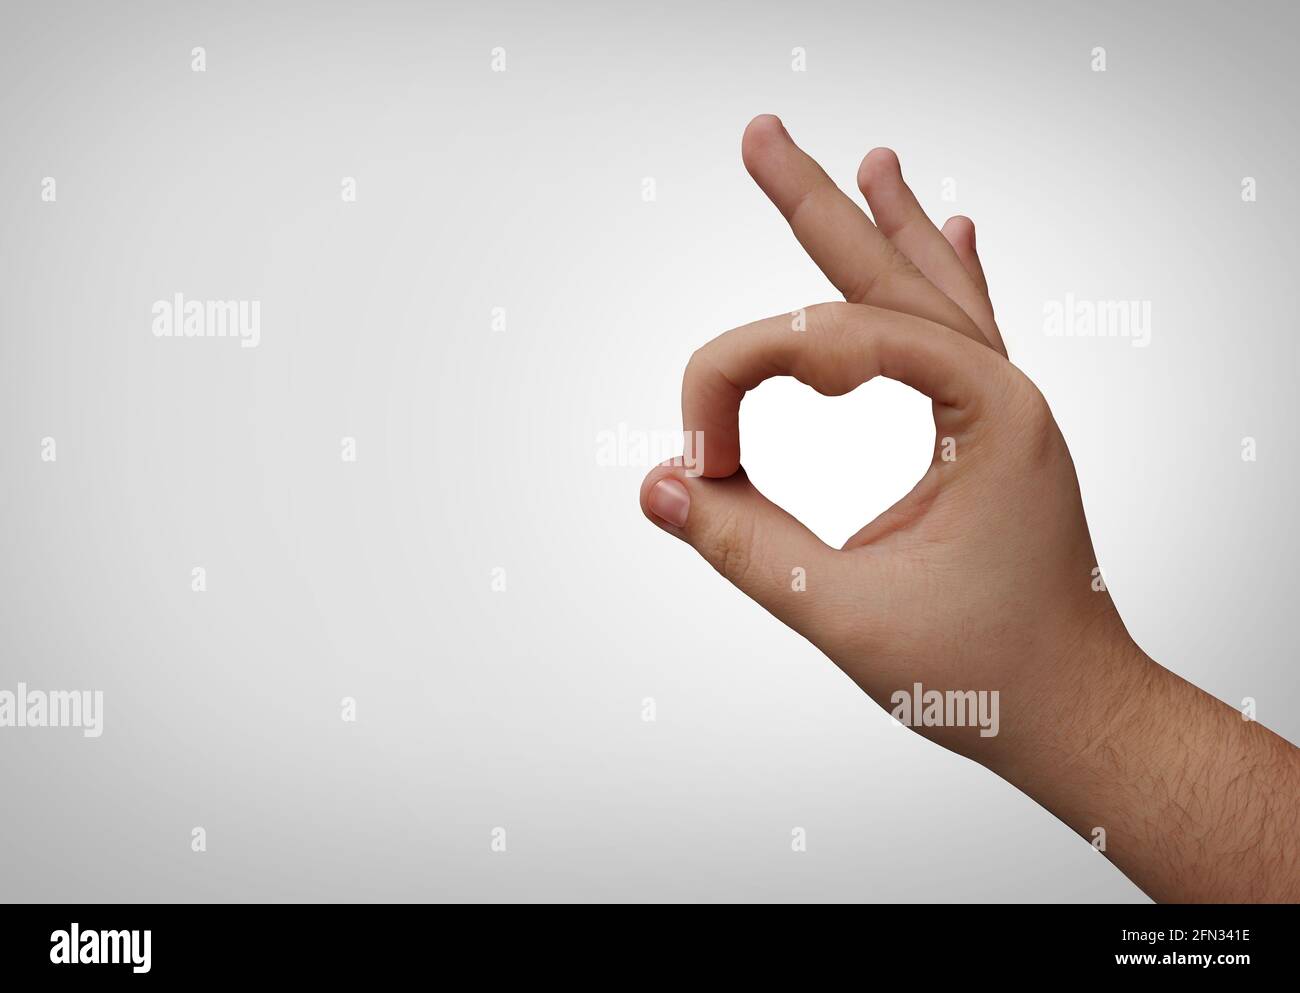 Caring touch concept and human care for good causes as a generosity symbol representing health services love or donating for the welfare of the poor. Stock Photo